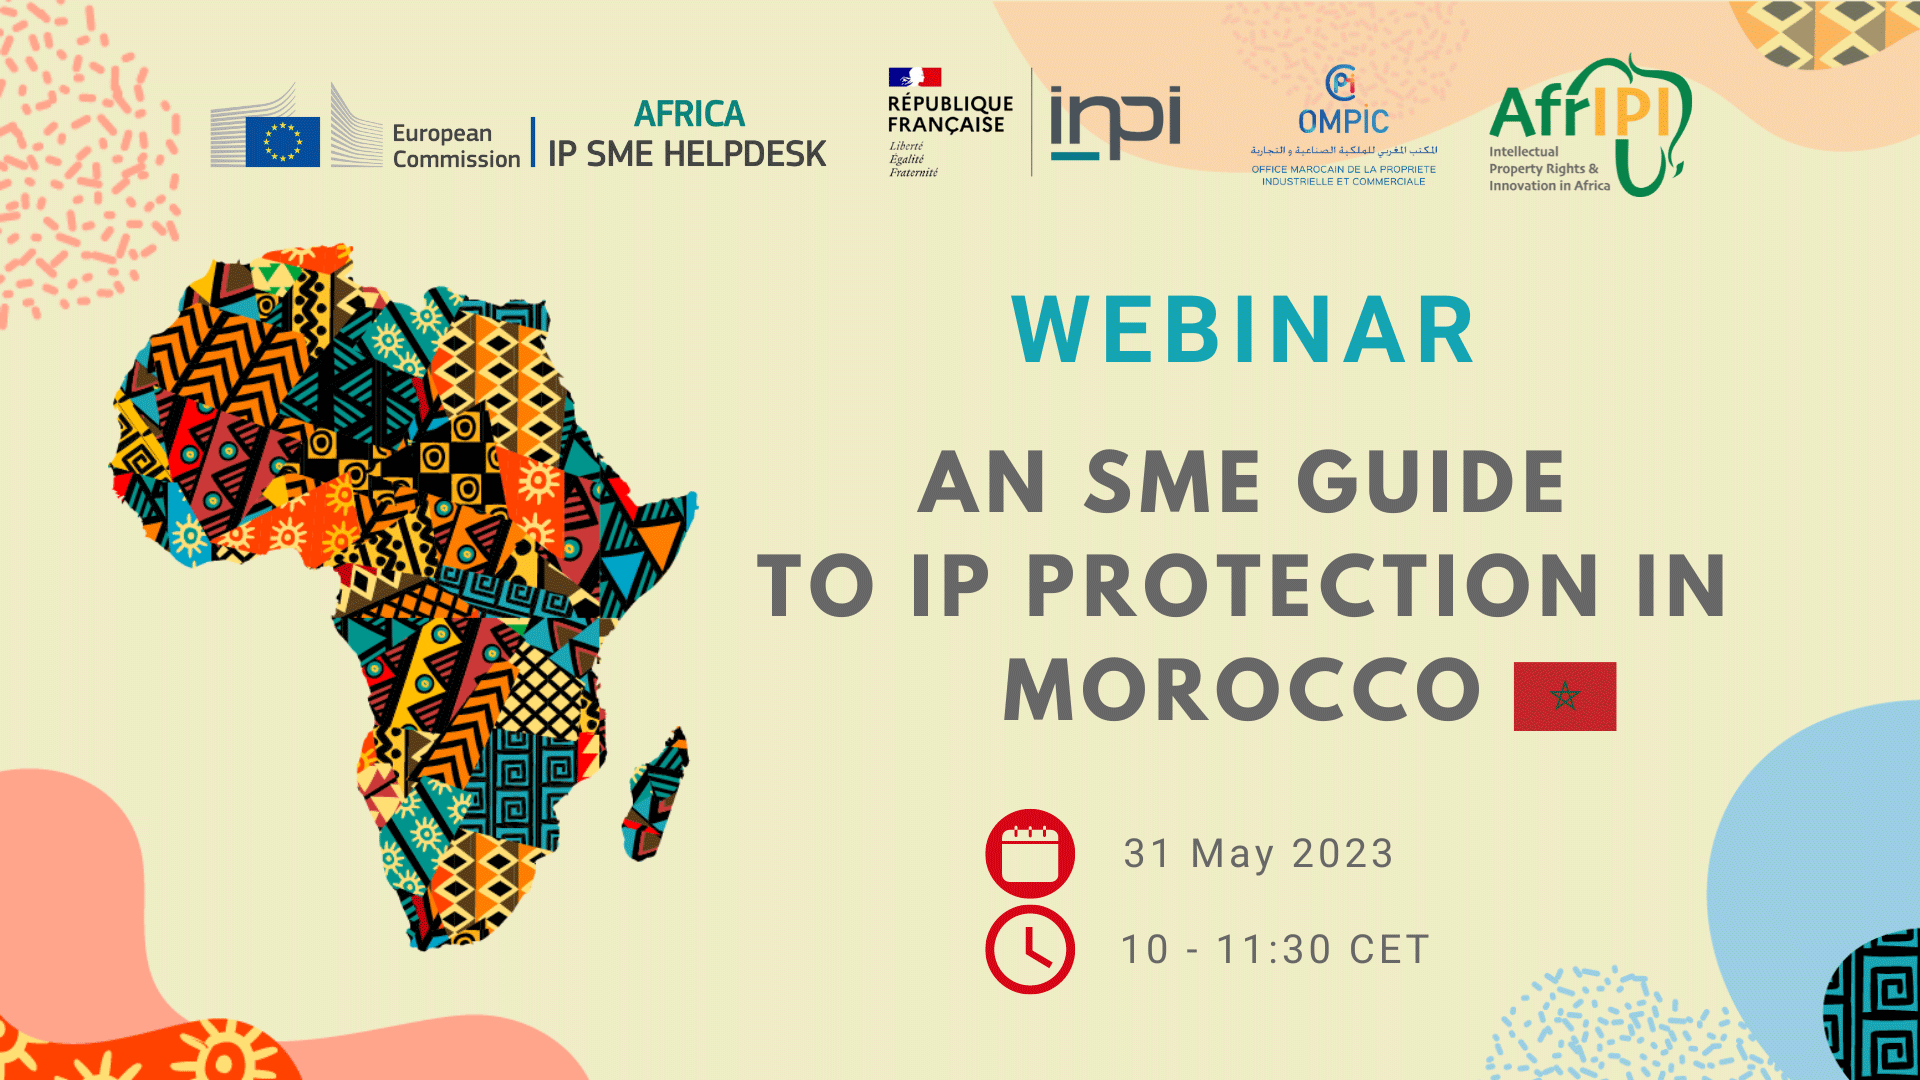 Webinar Morocco 2023 logo and title for the event